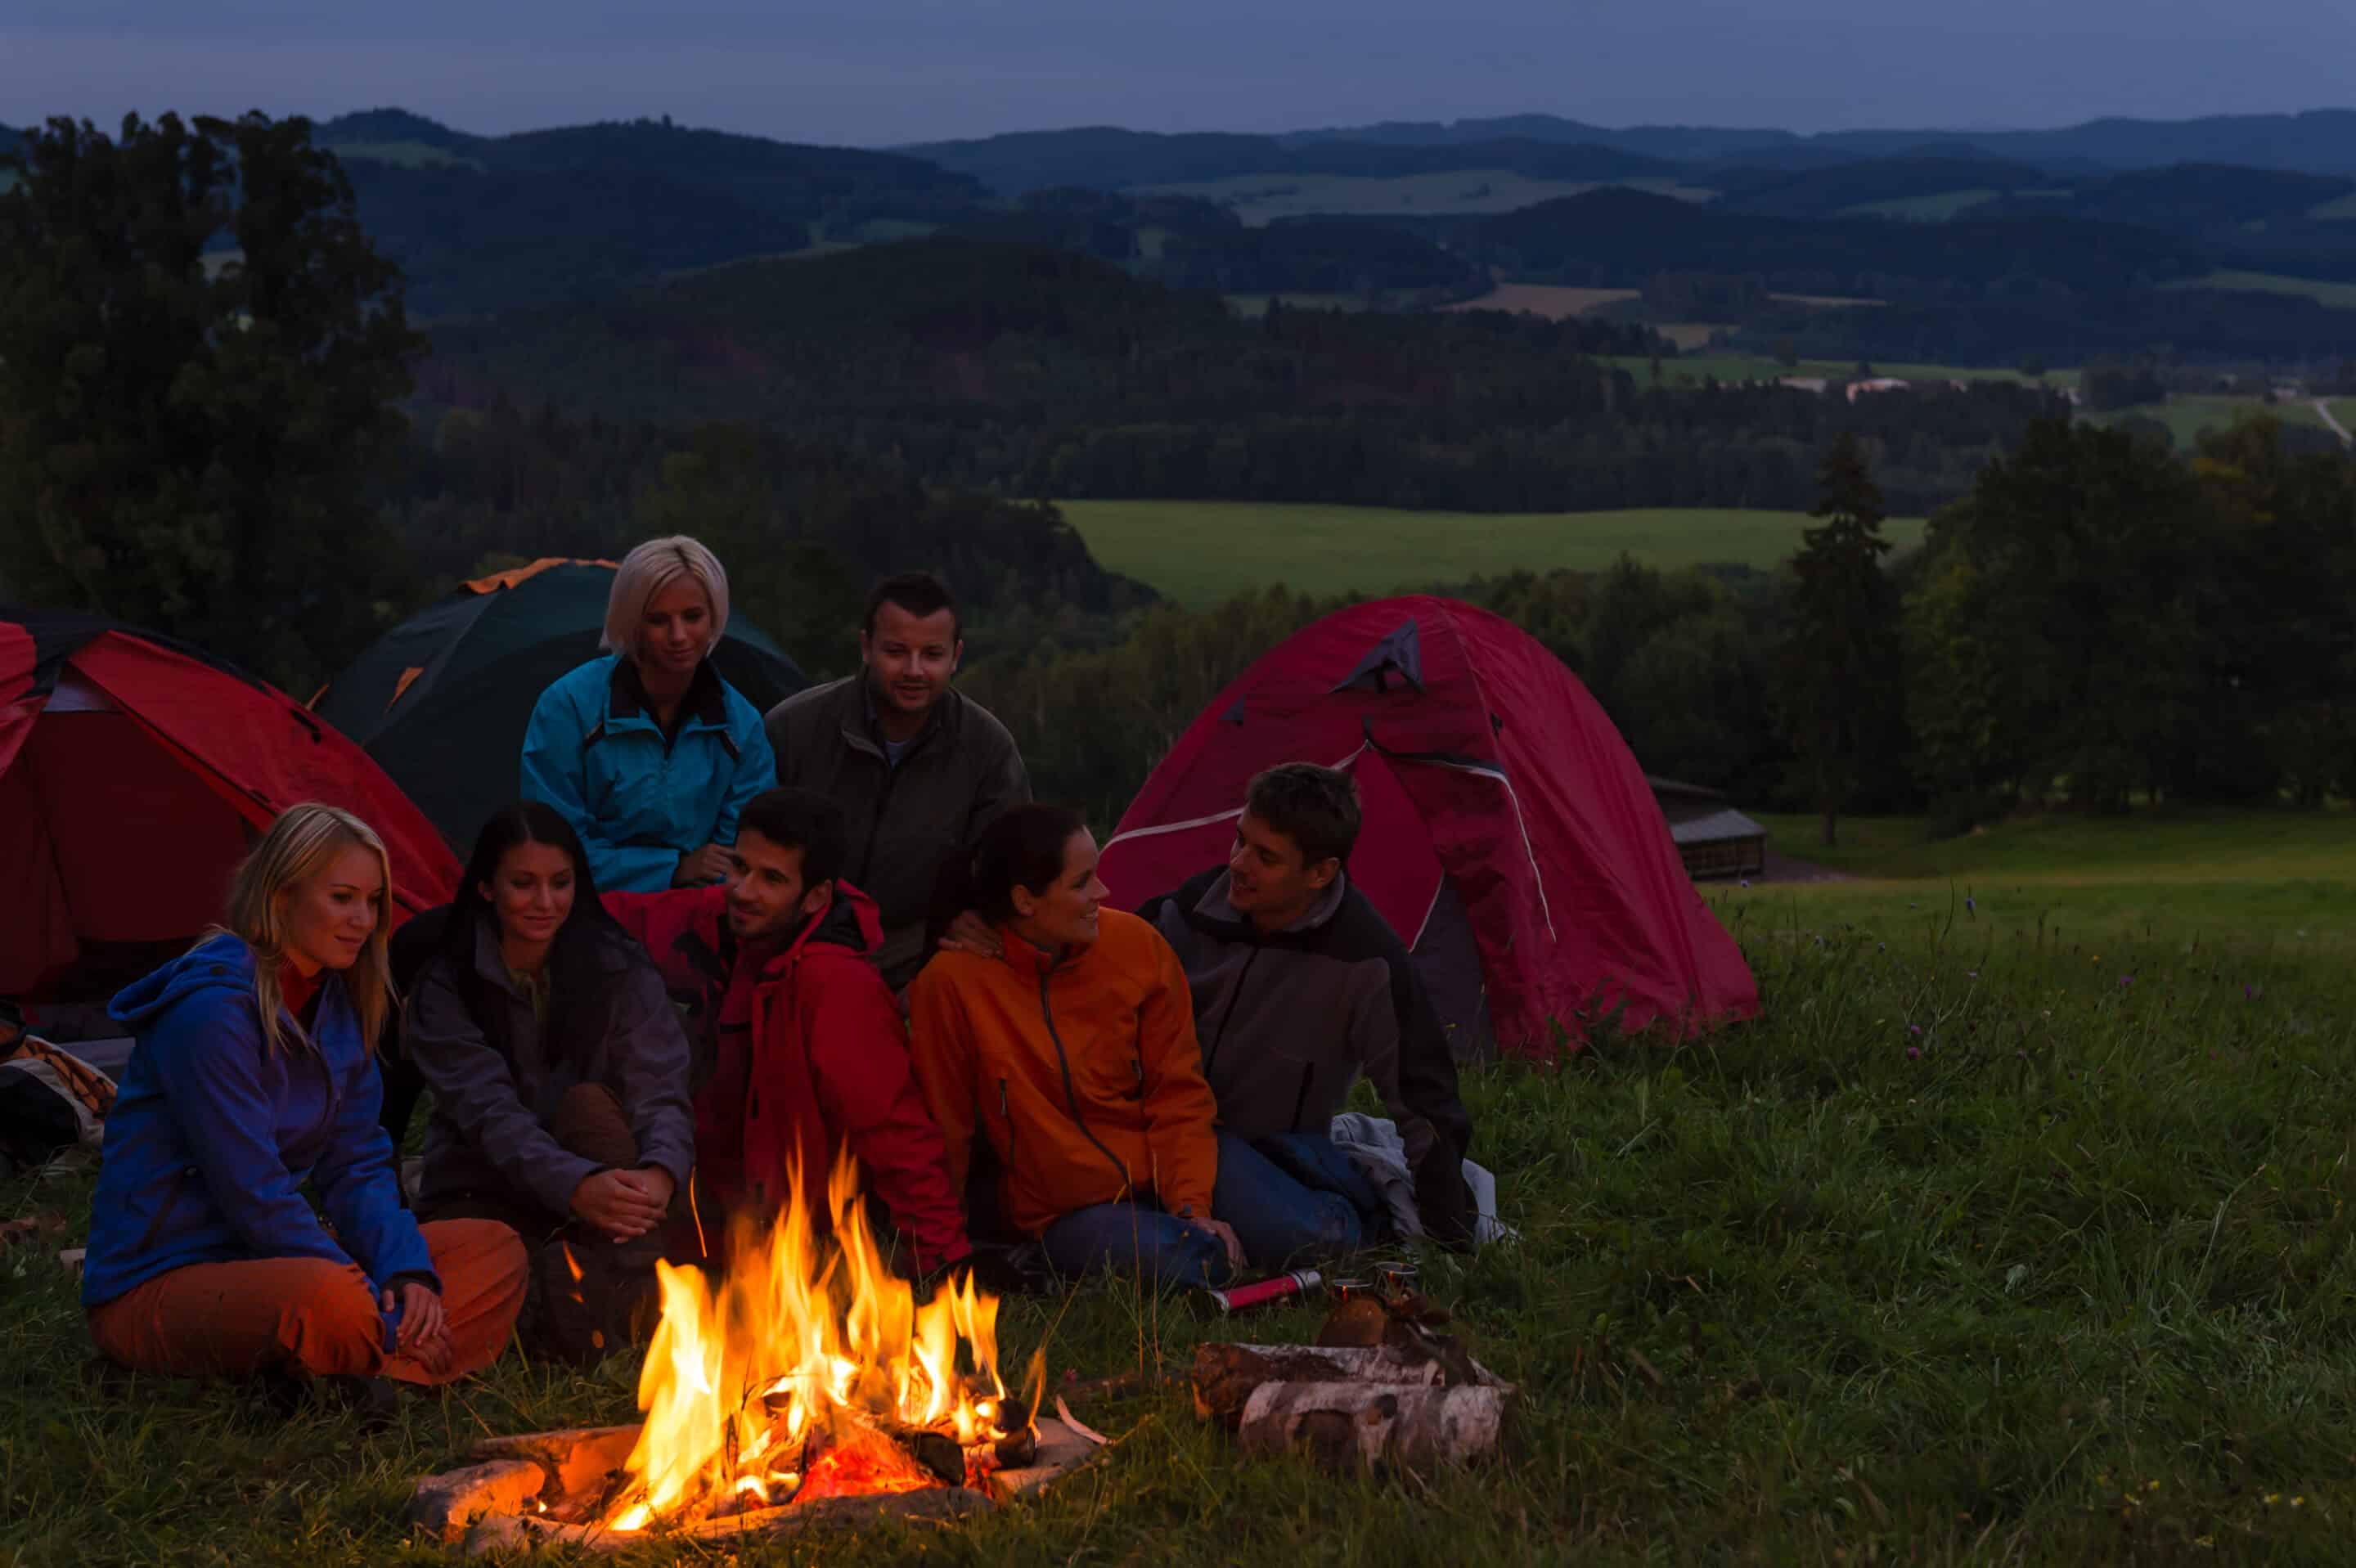 a family camping in a field at night, a fun family vacation